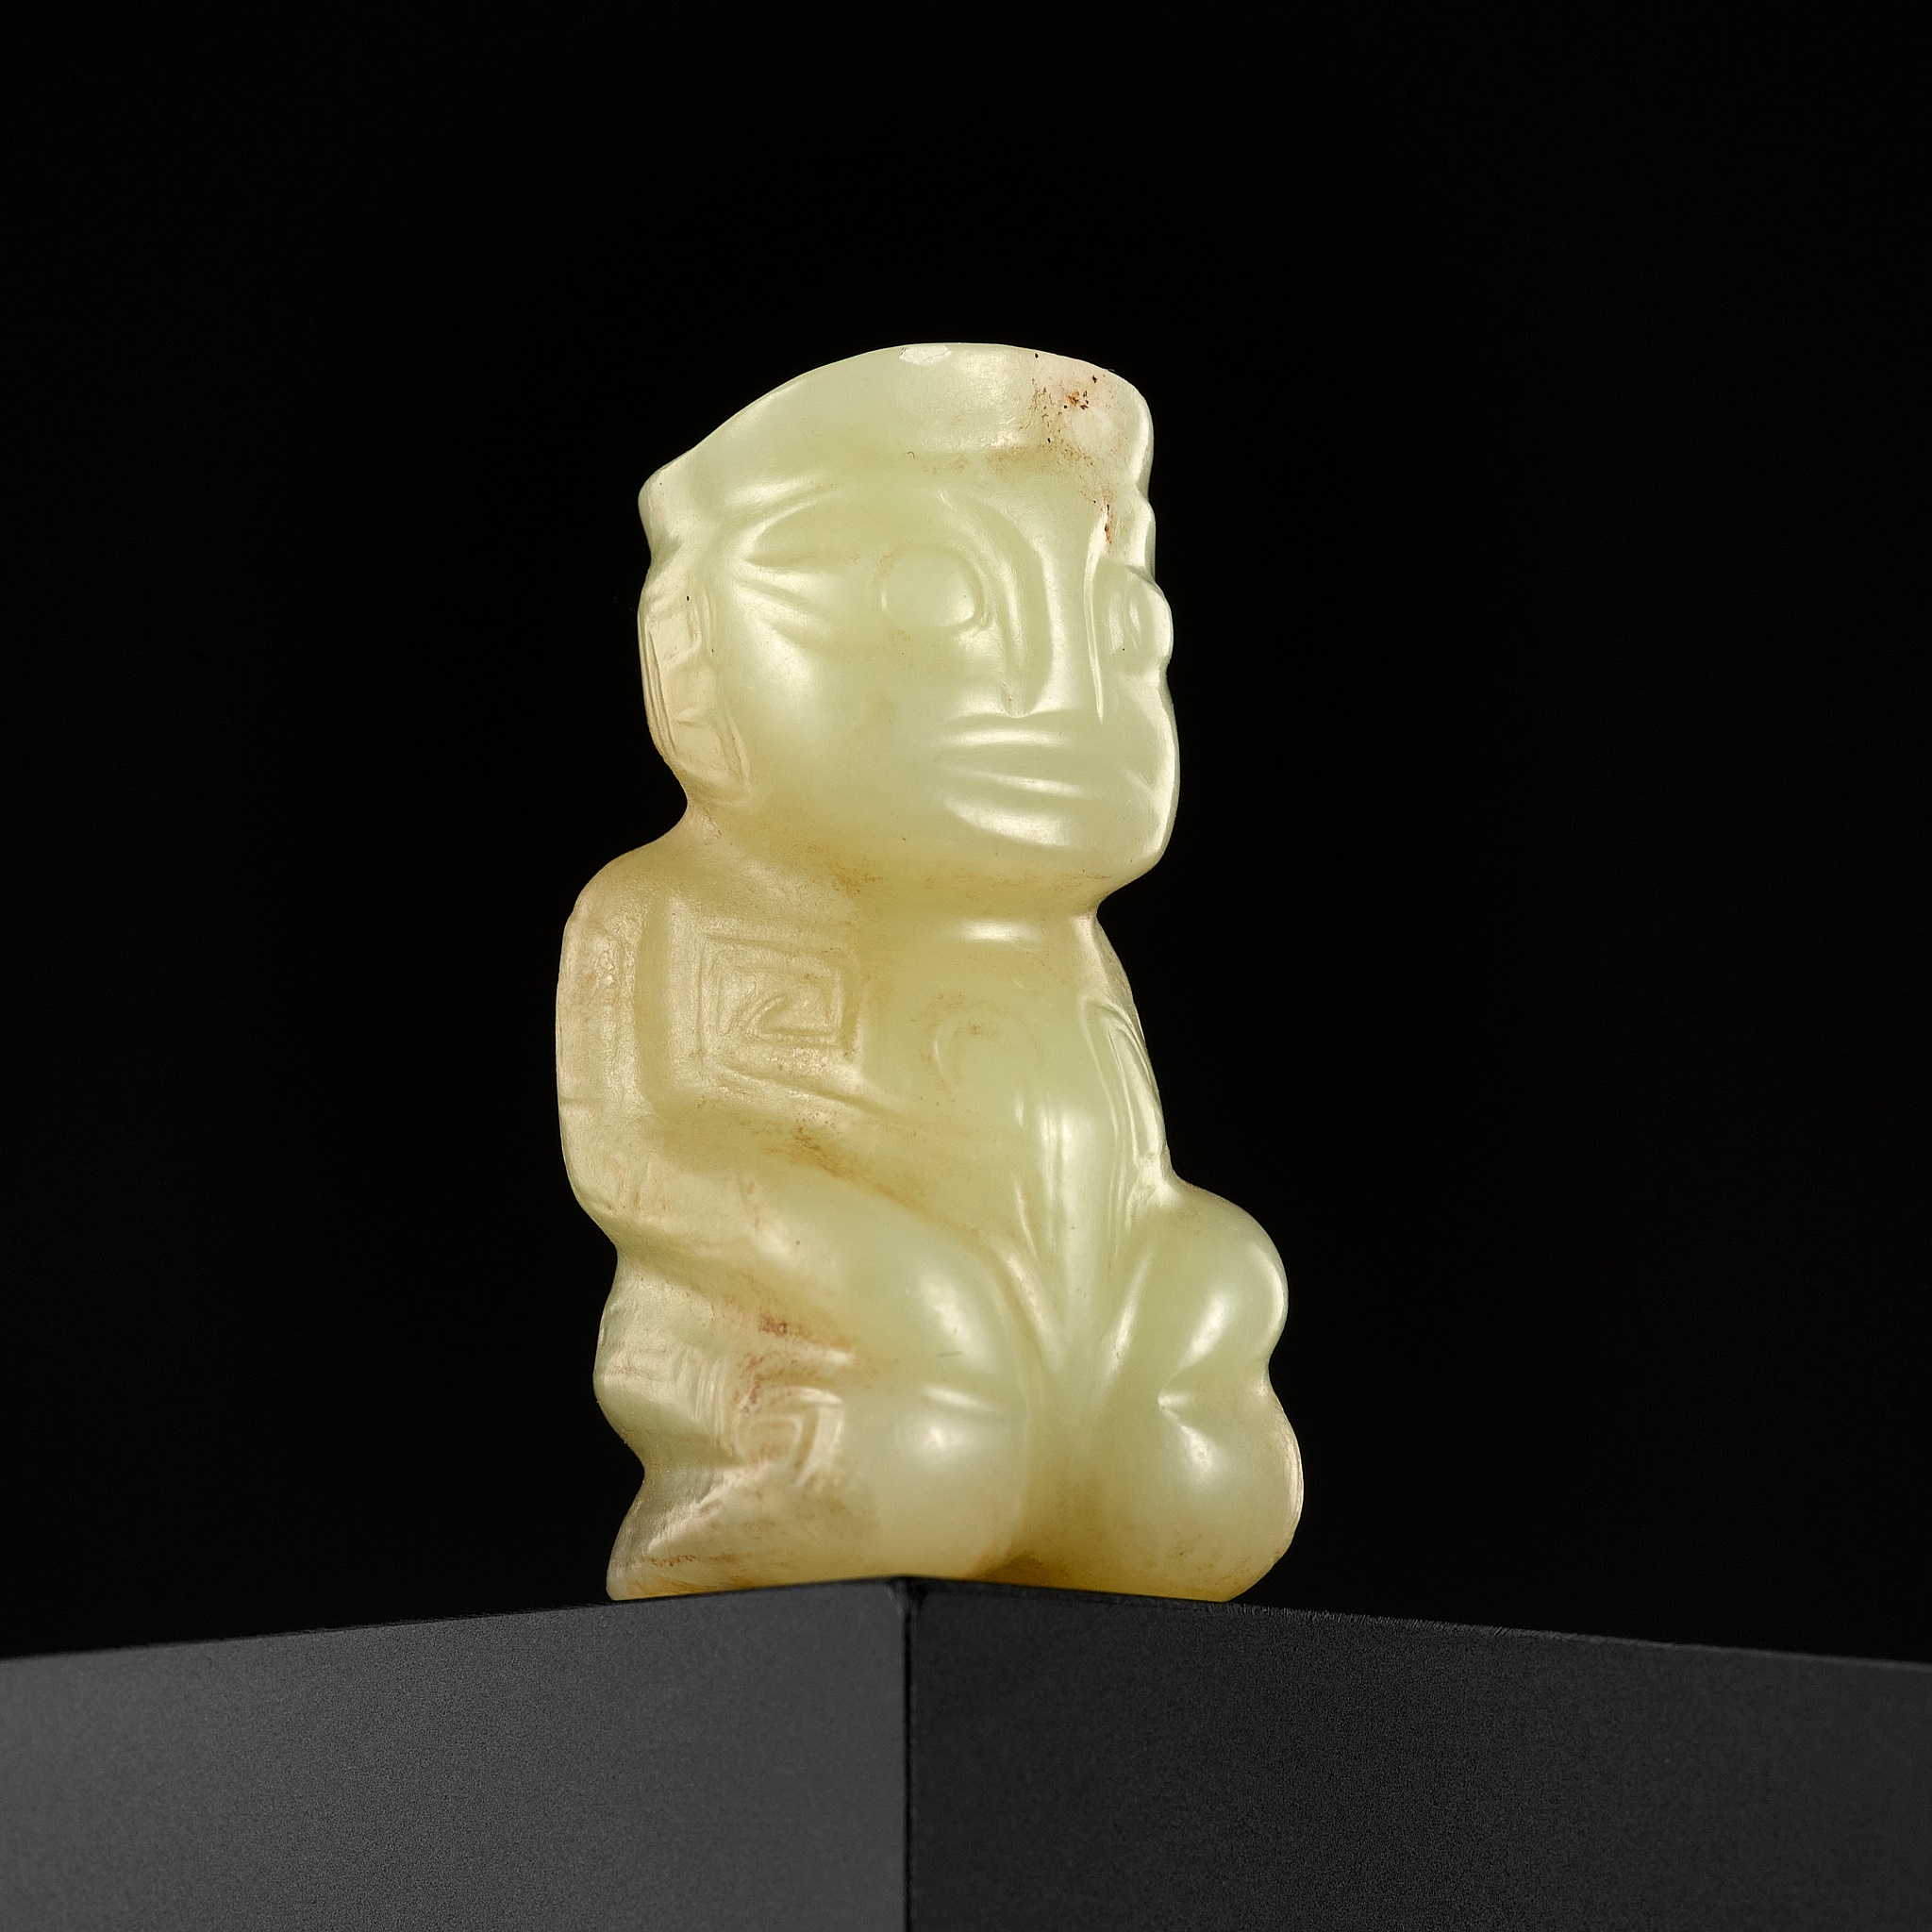 AN EXTREMELY RARE YELLOW JADE 'KNEELING FIGURE', SHANG DYNASTY